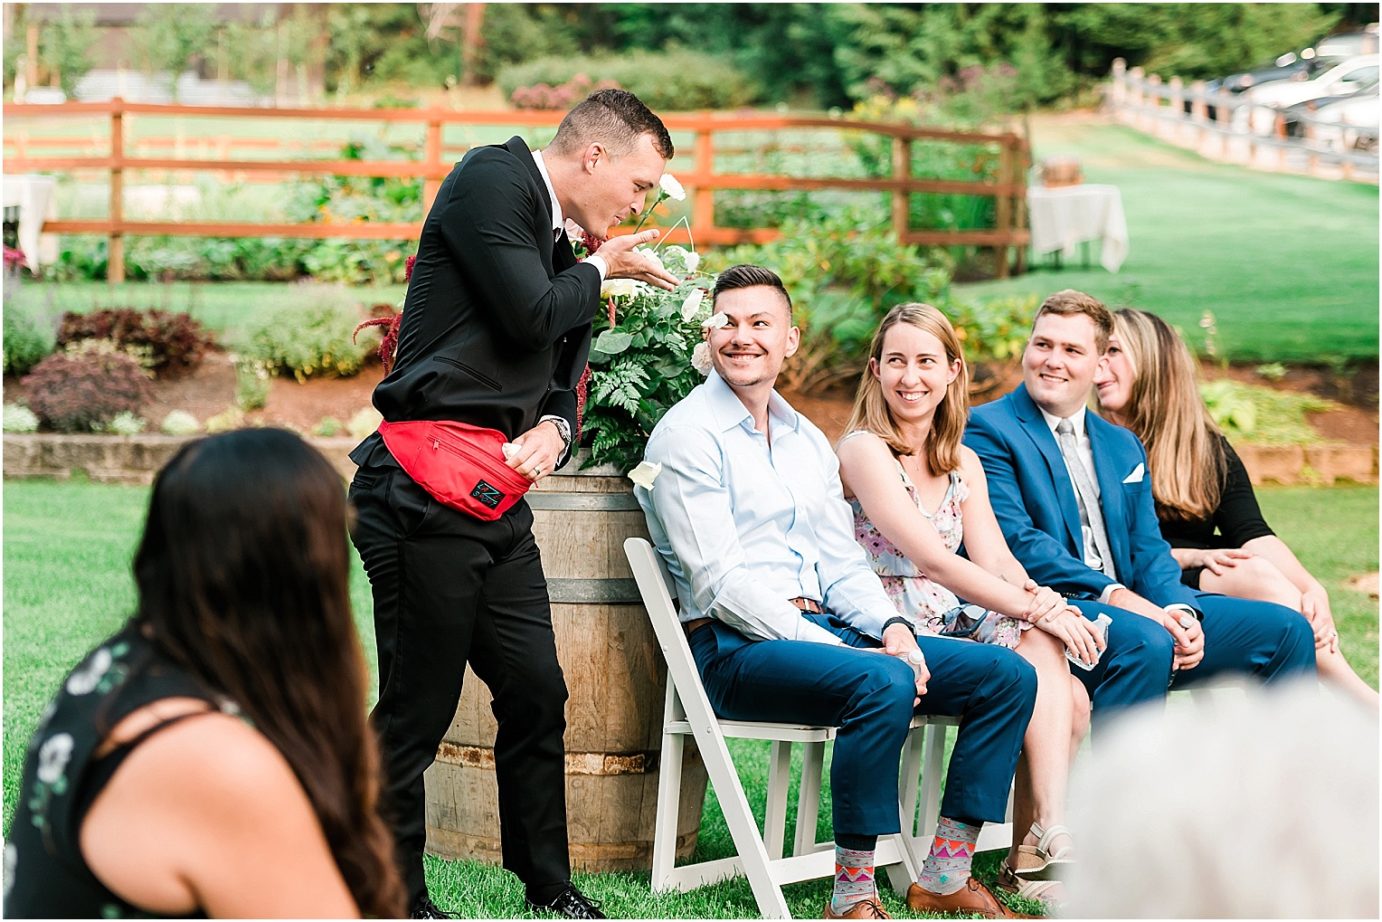 Intimate Pine River Ranch Wedding Leavenworth Photographer Jon and Kristen flower dude with fanny pack